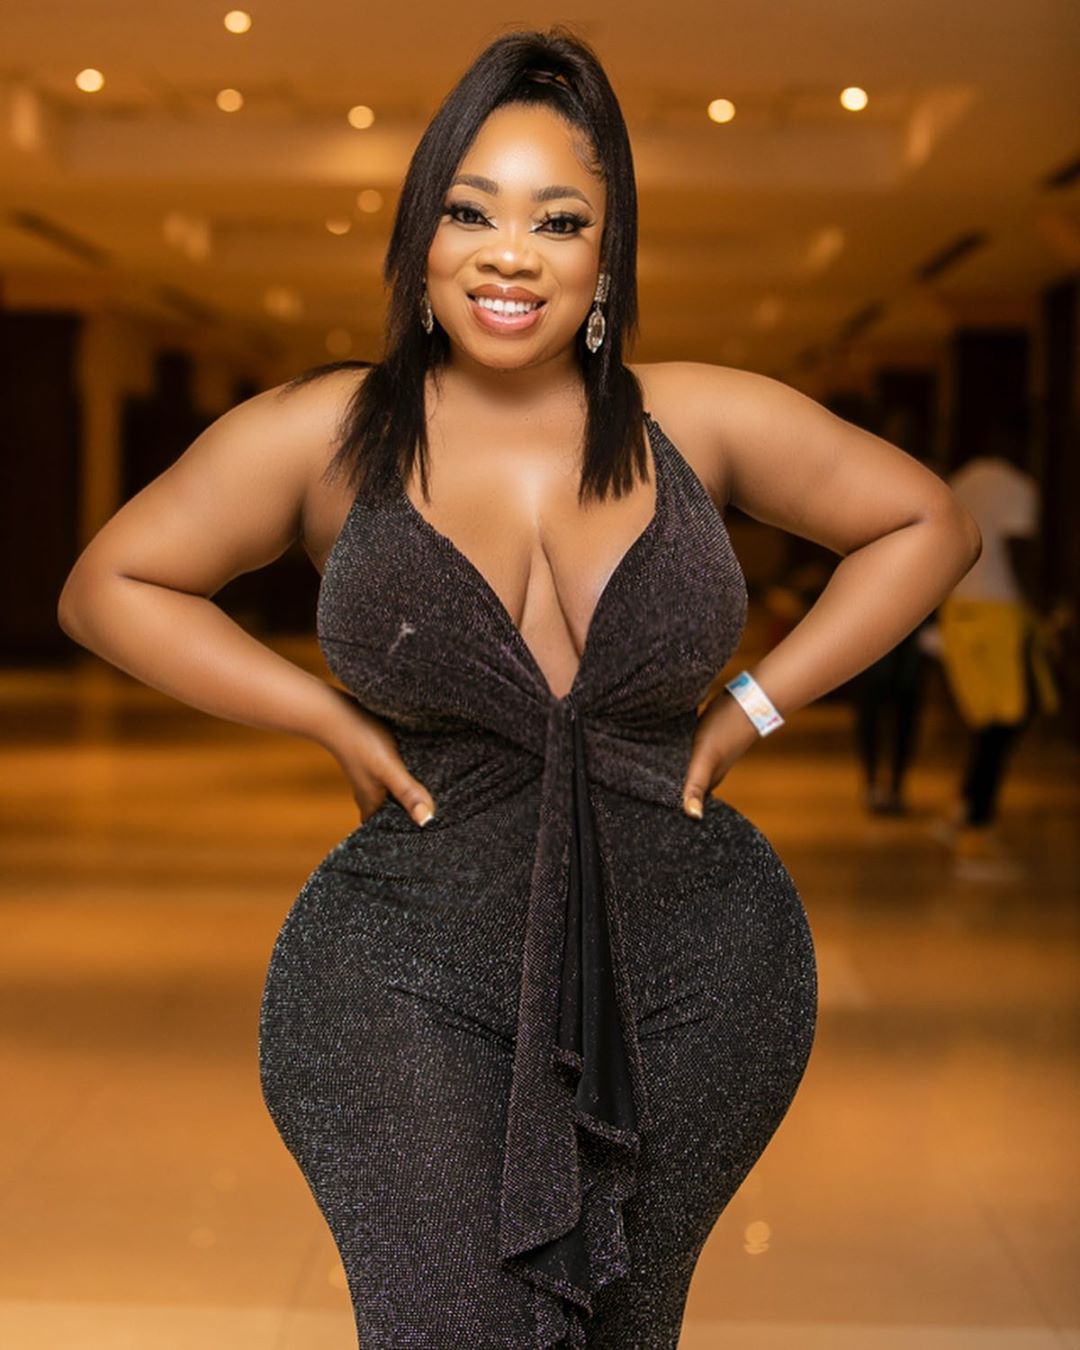 Ghanaian Curvy Actress Moesha Boduong shows off Major cleavages in a Braless outfit (Photos)